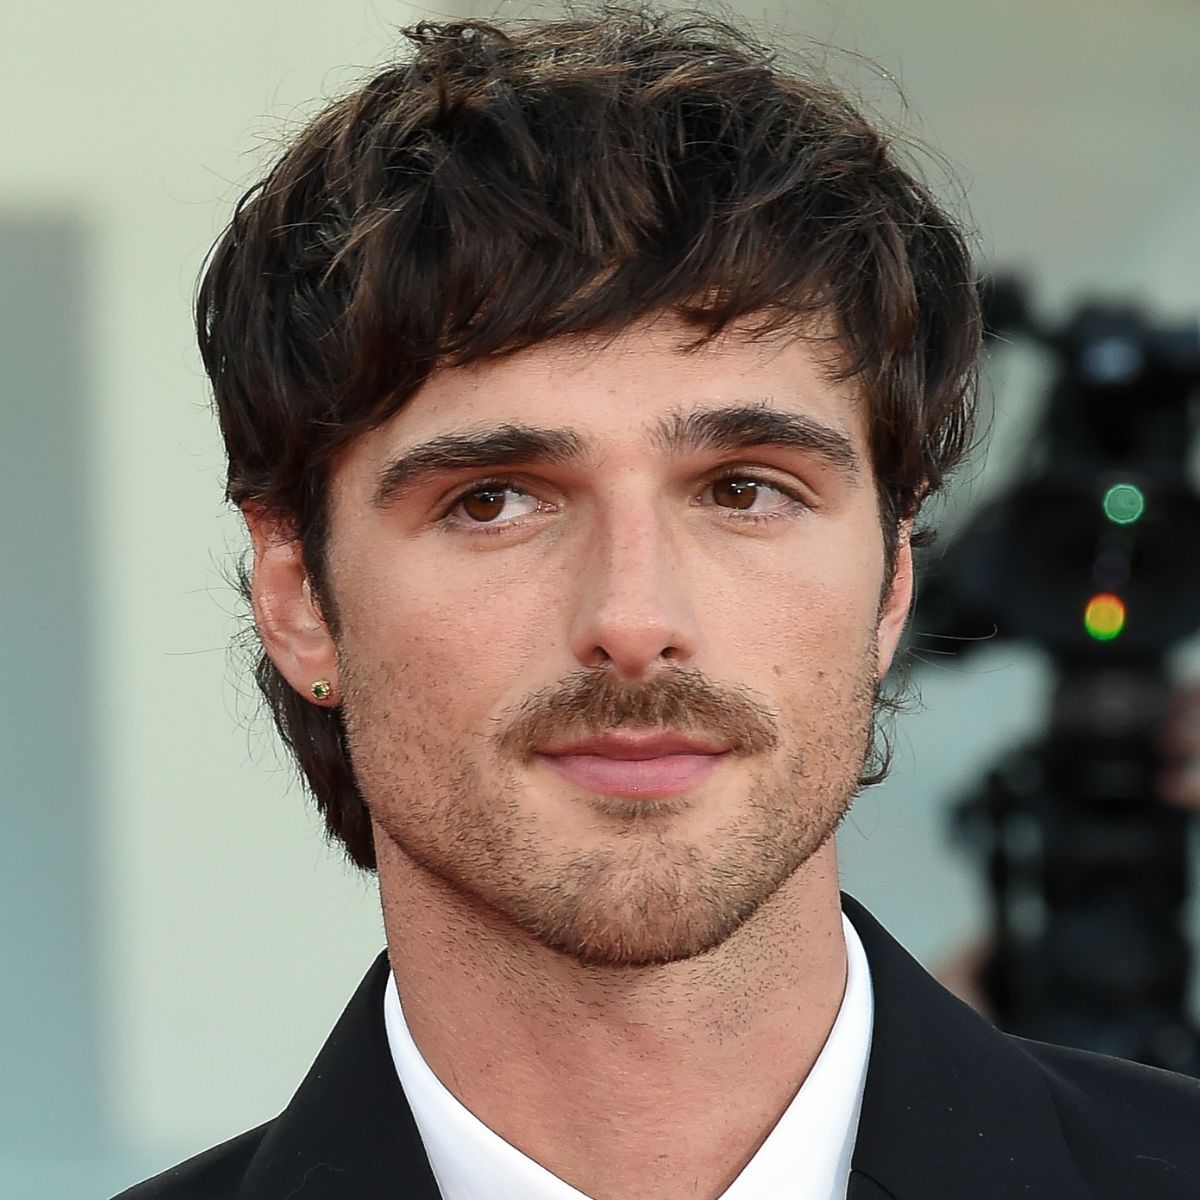 jacob-elordi-tousled-textured-hairstyle-with-thick-fringe-hairstyle-haircut-man-for-himself-ft.jpg